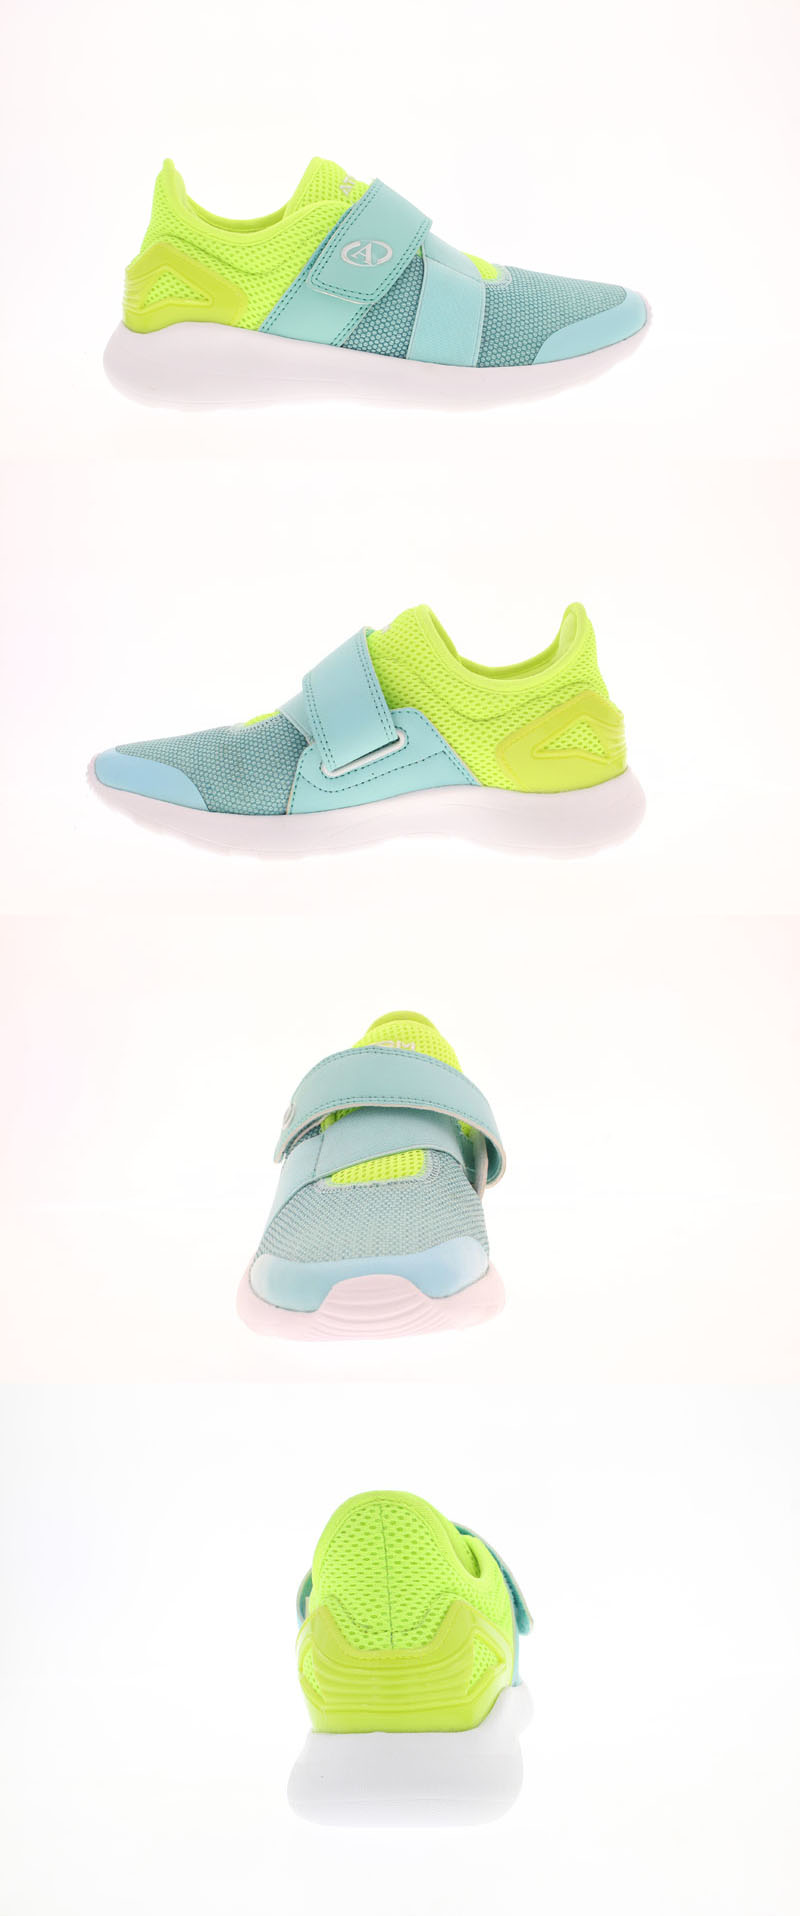 Neon yellow light blue shoes